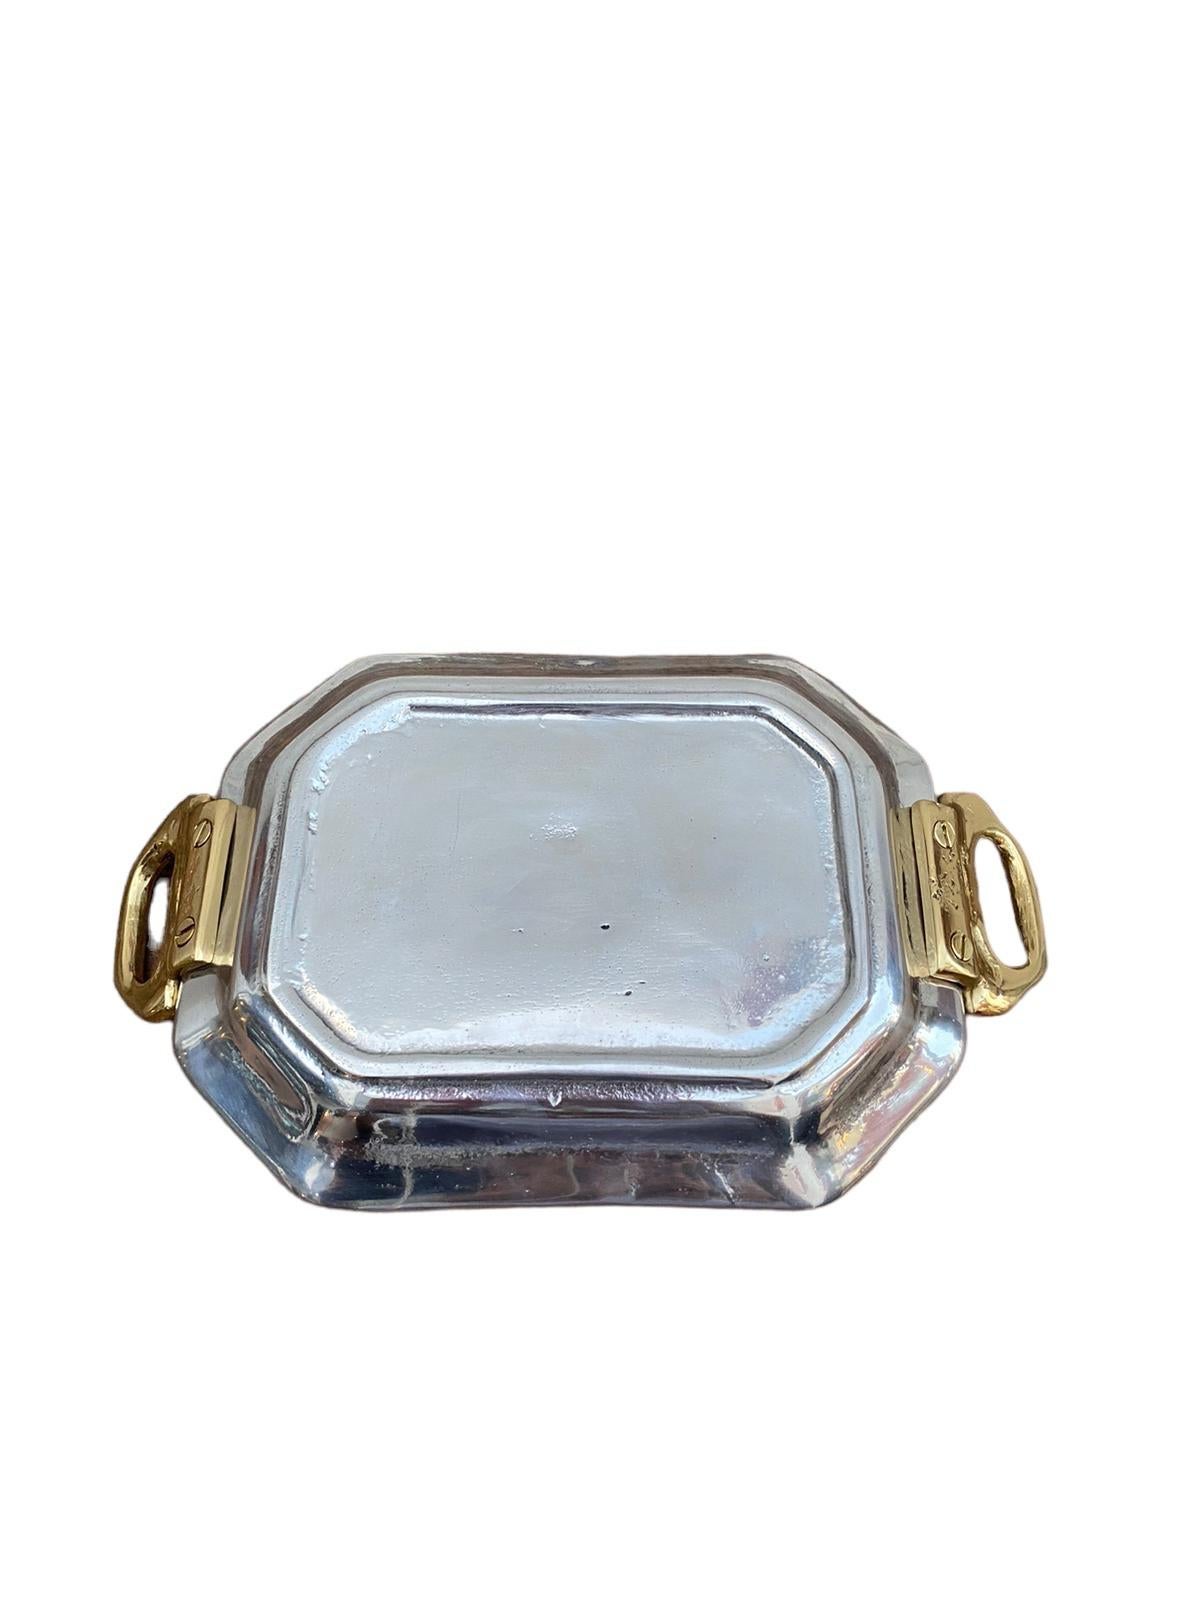 Spanish Octagonal Card Tray E006 Silver and Gold Desk Tray Handmade in Spain For Sale